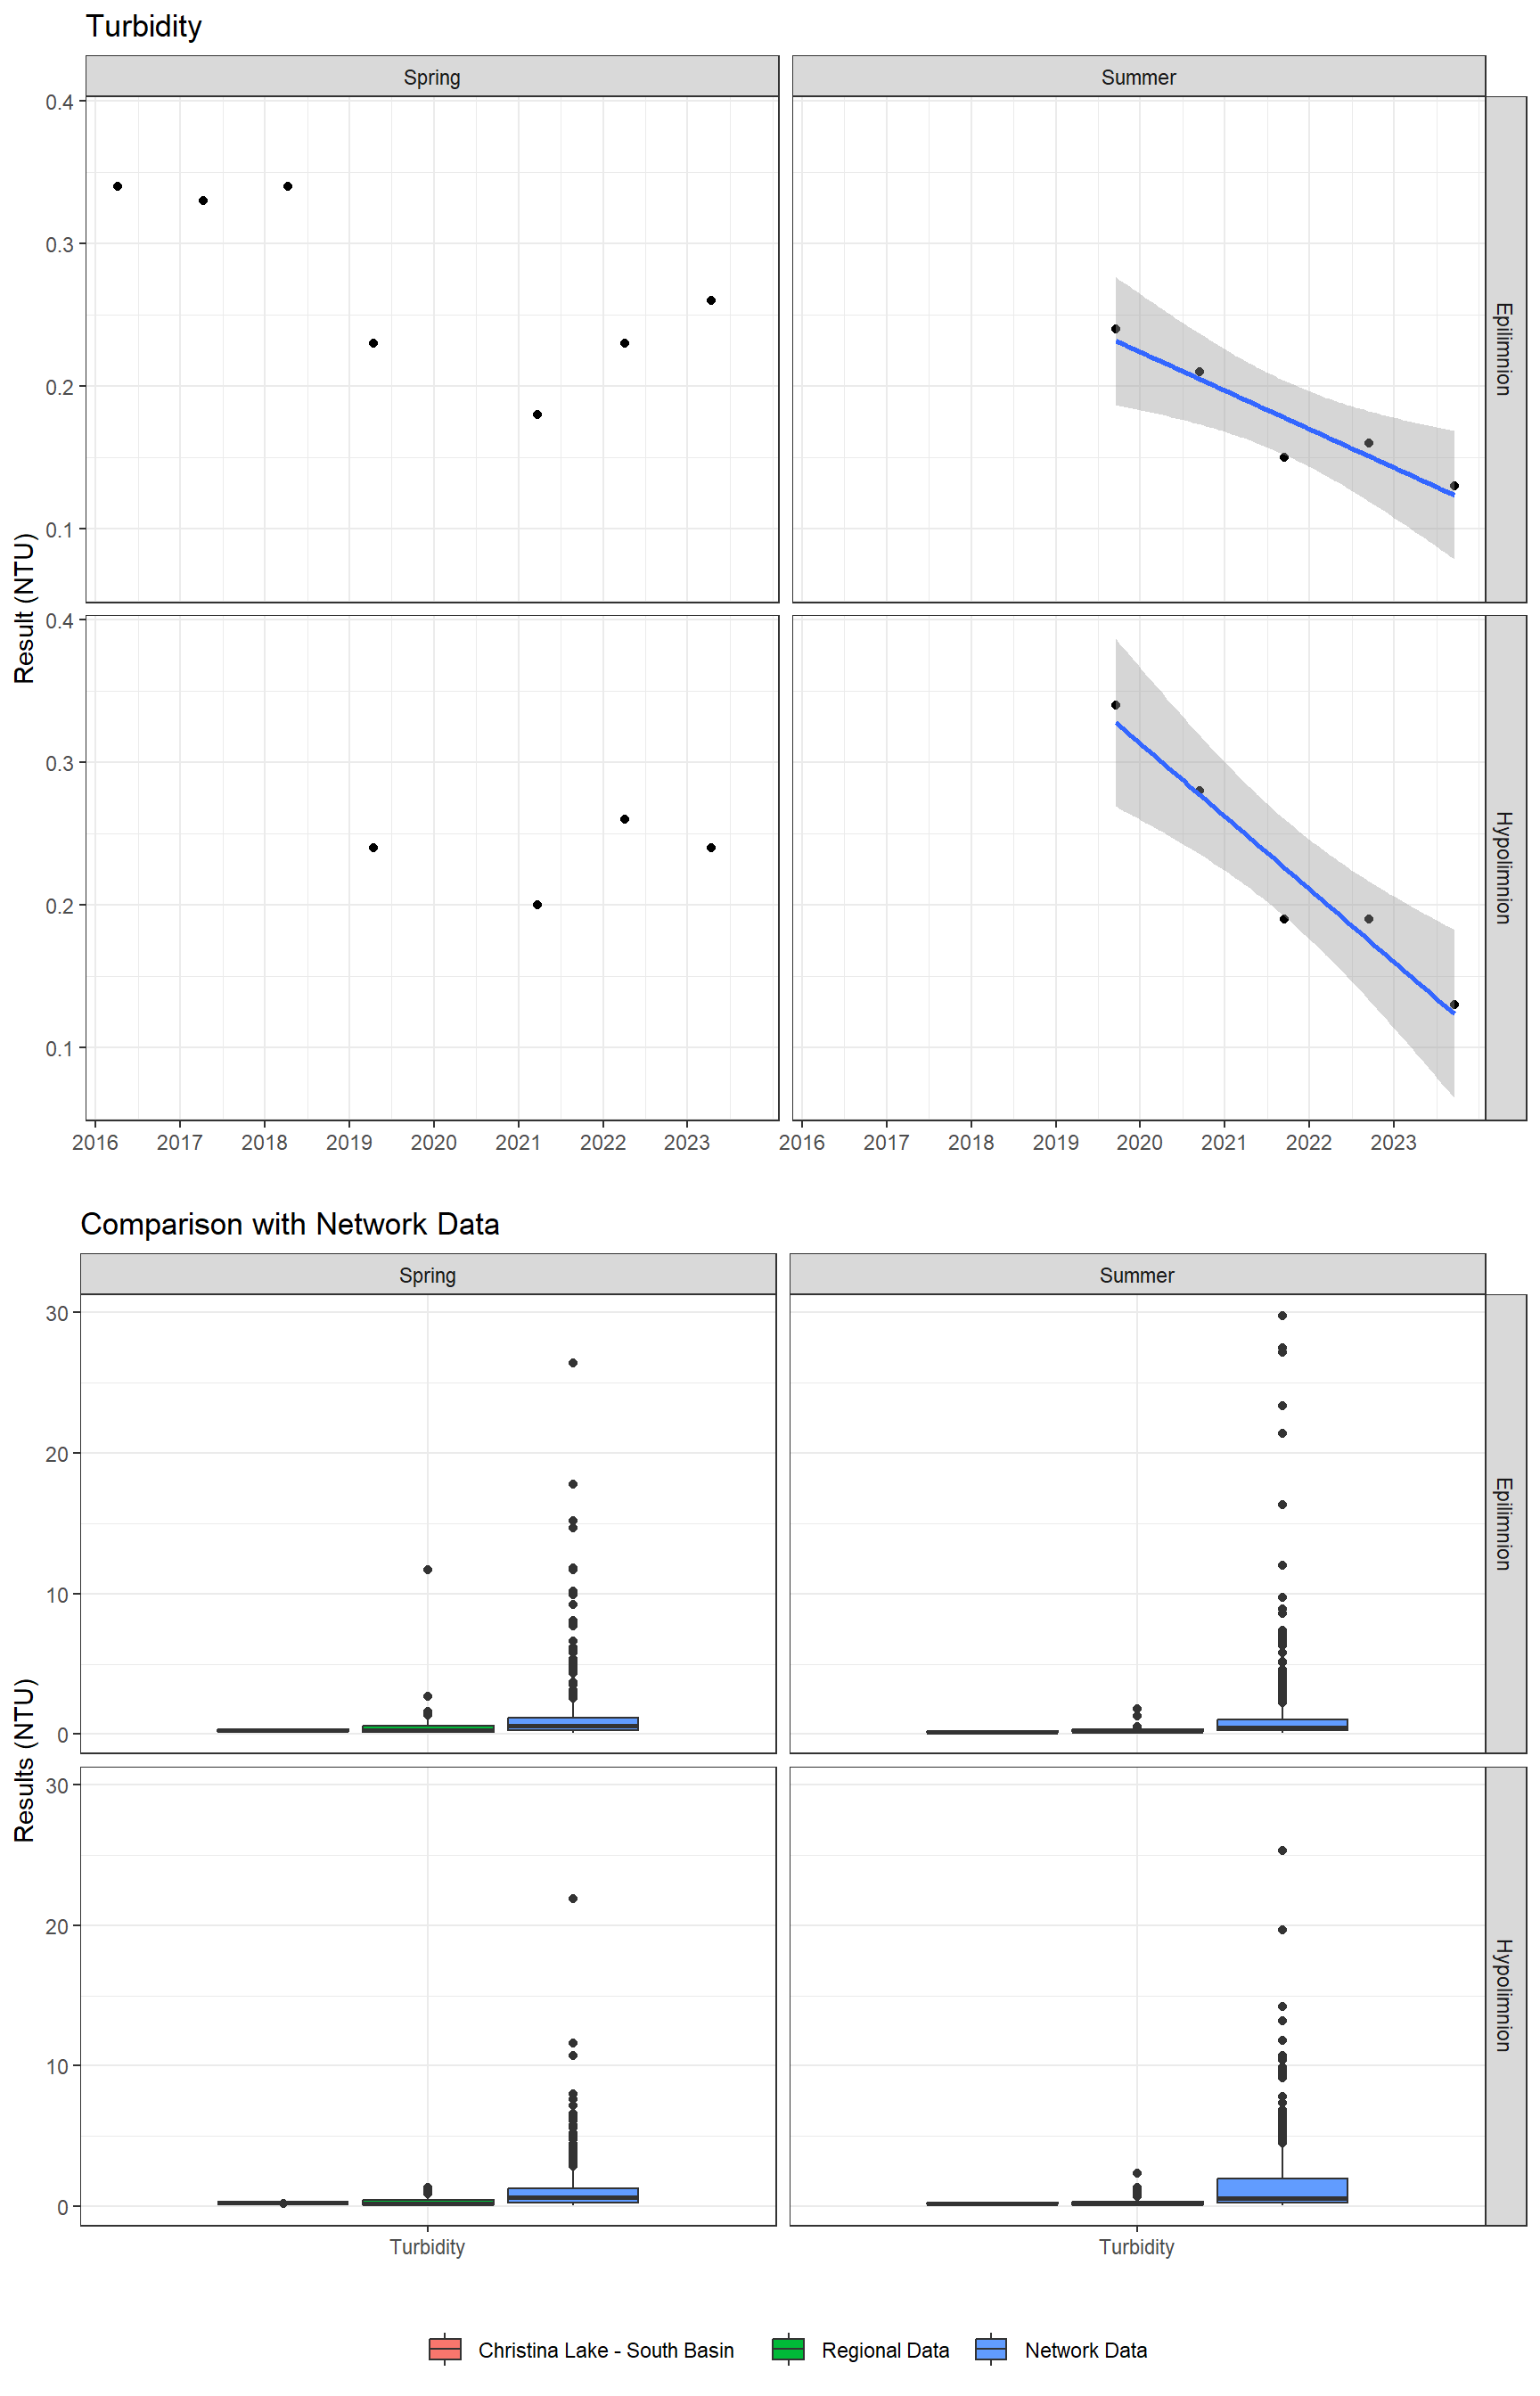 A plot showing results for Turbidity